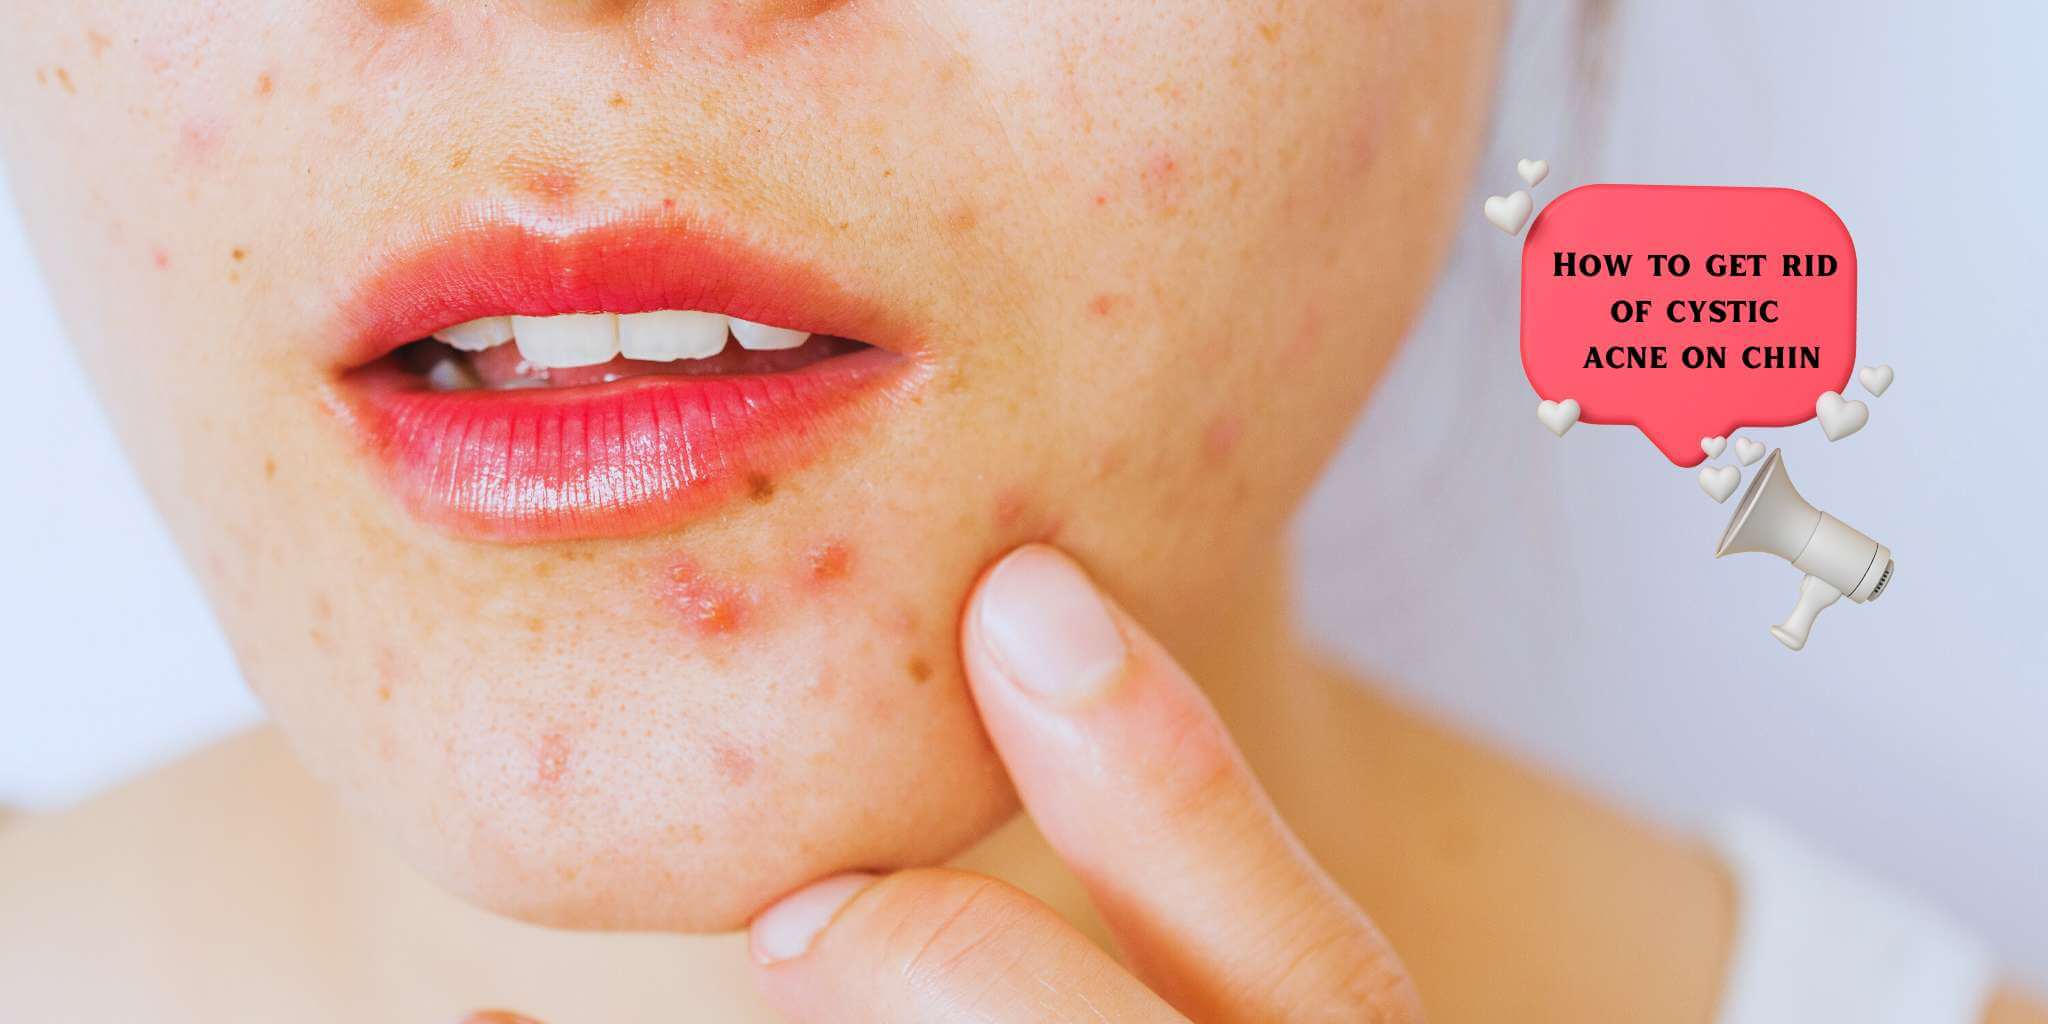 How to get rid of cystic acne on chin